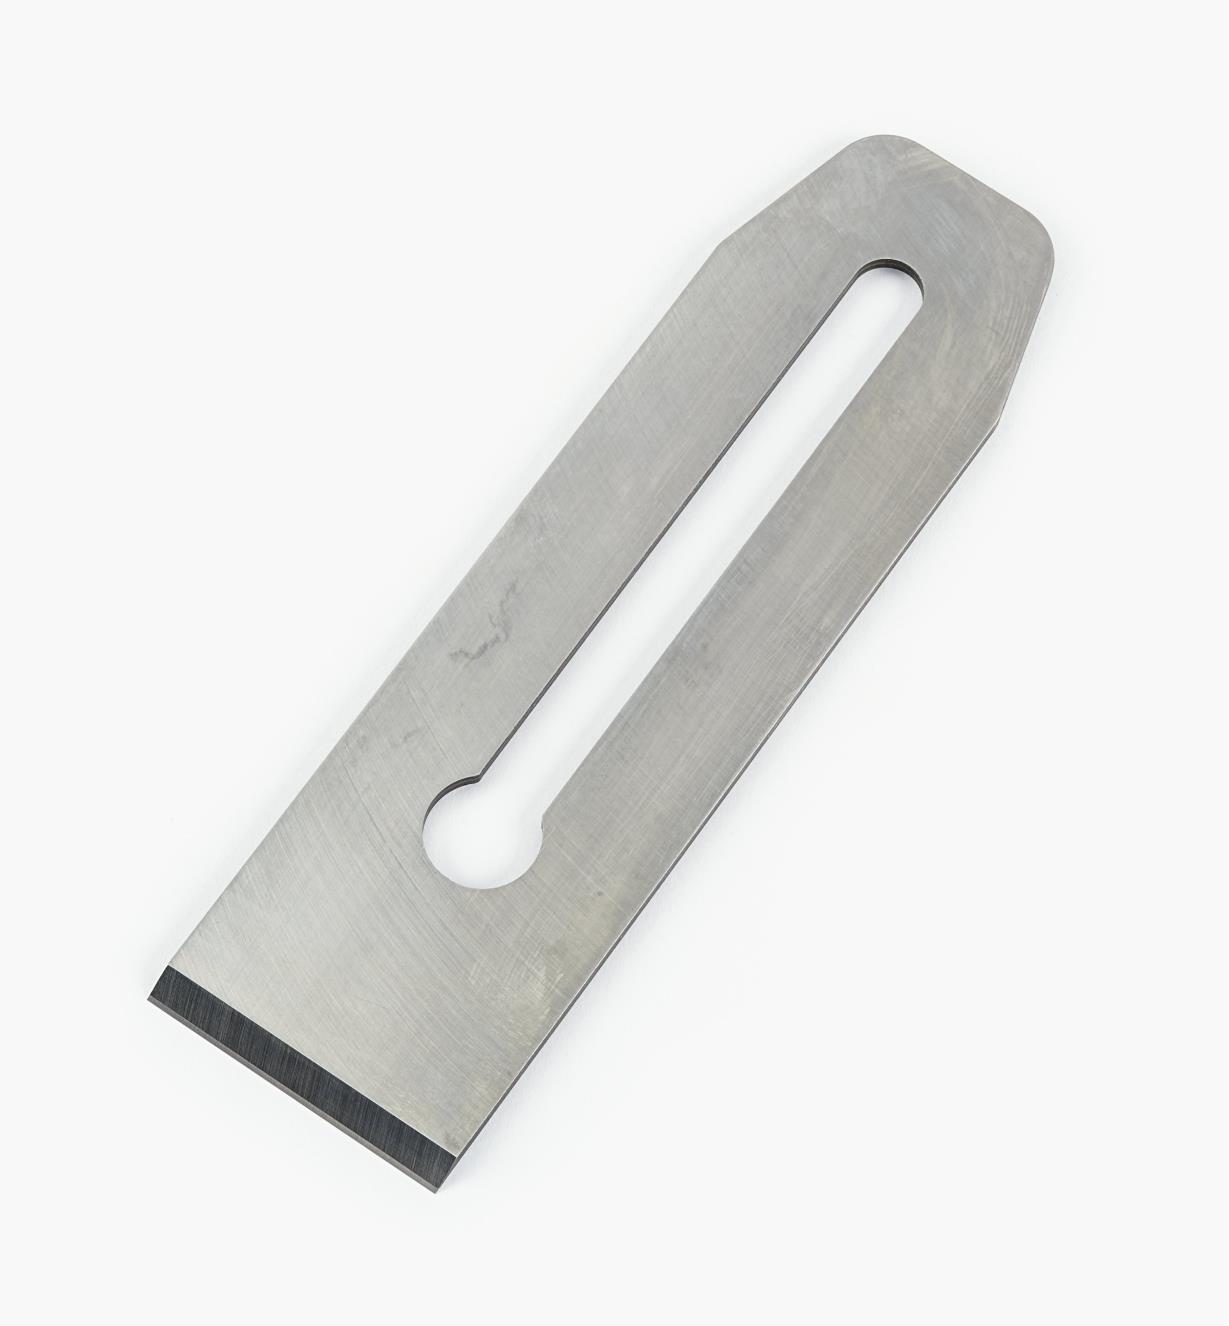 05P2402 - Replacement A2 Blade, 2"